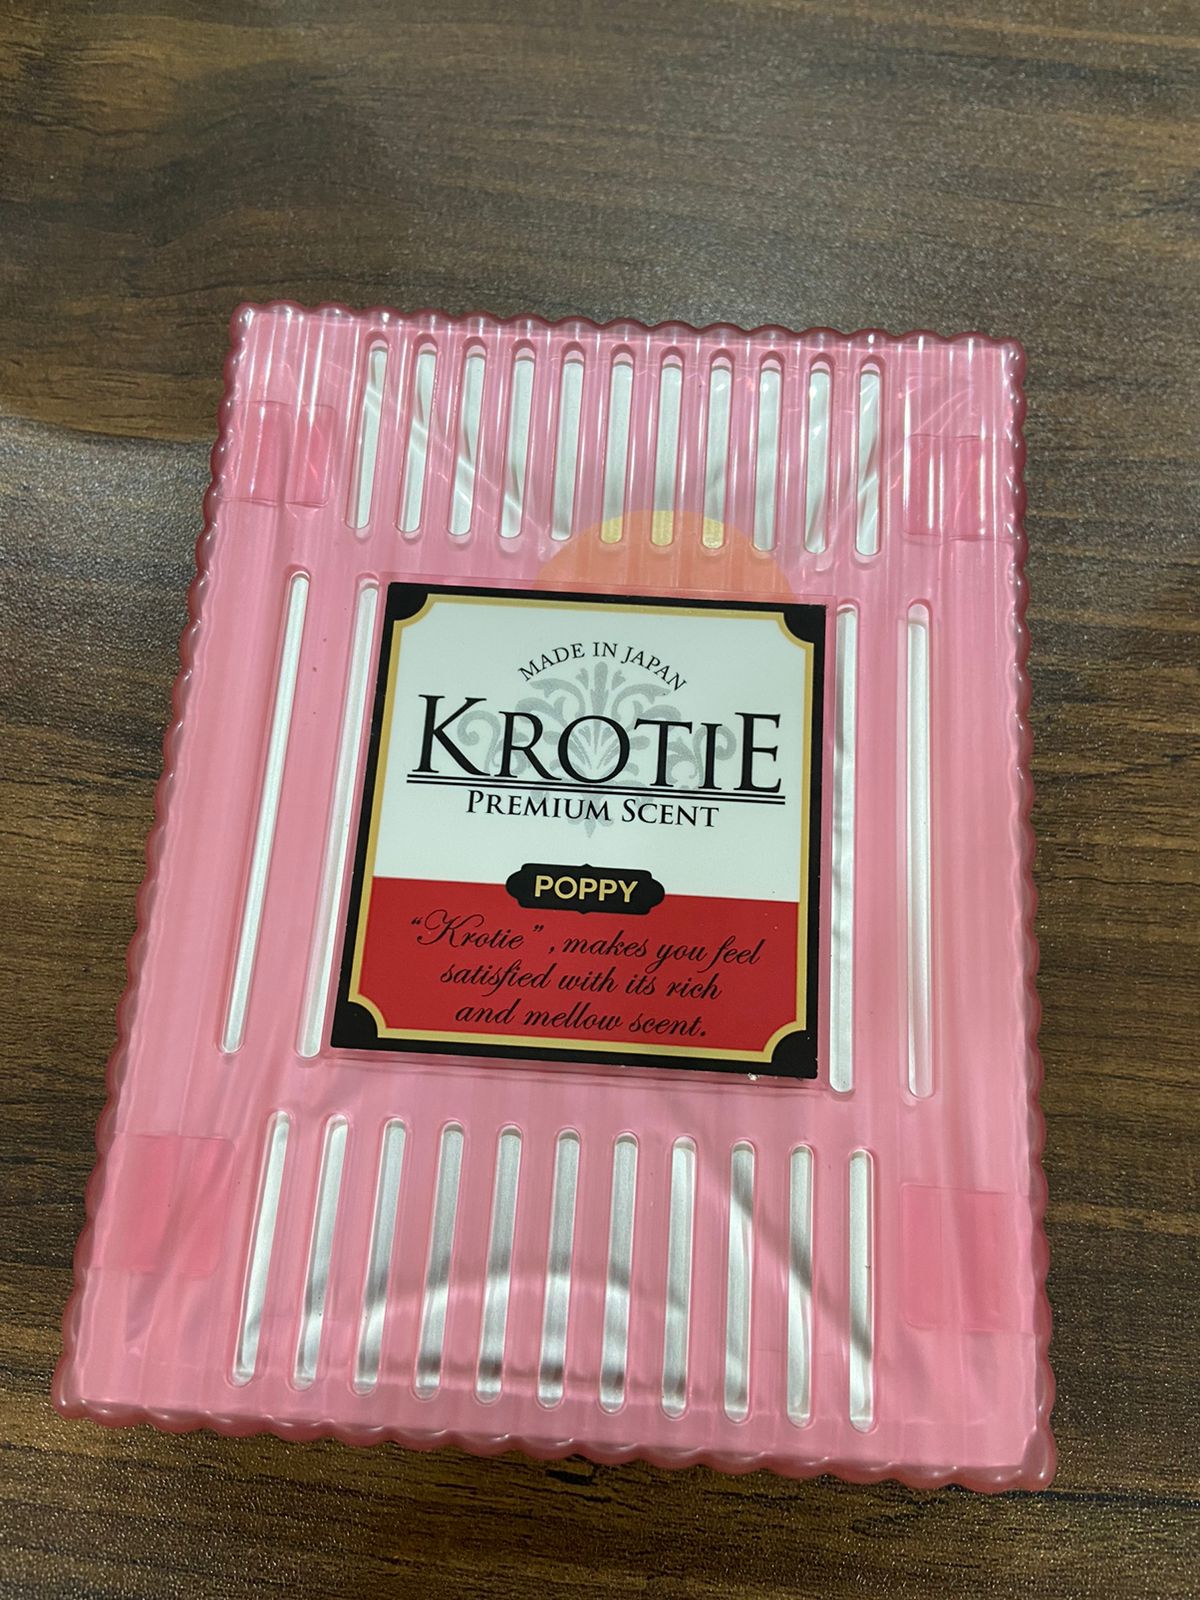 Krotie Premium Scent Poppy (Rich and Mellow Scent ) 200 g-Use in under seat -Made in Japan